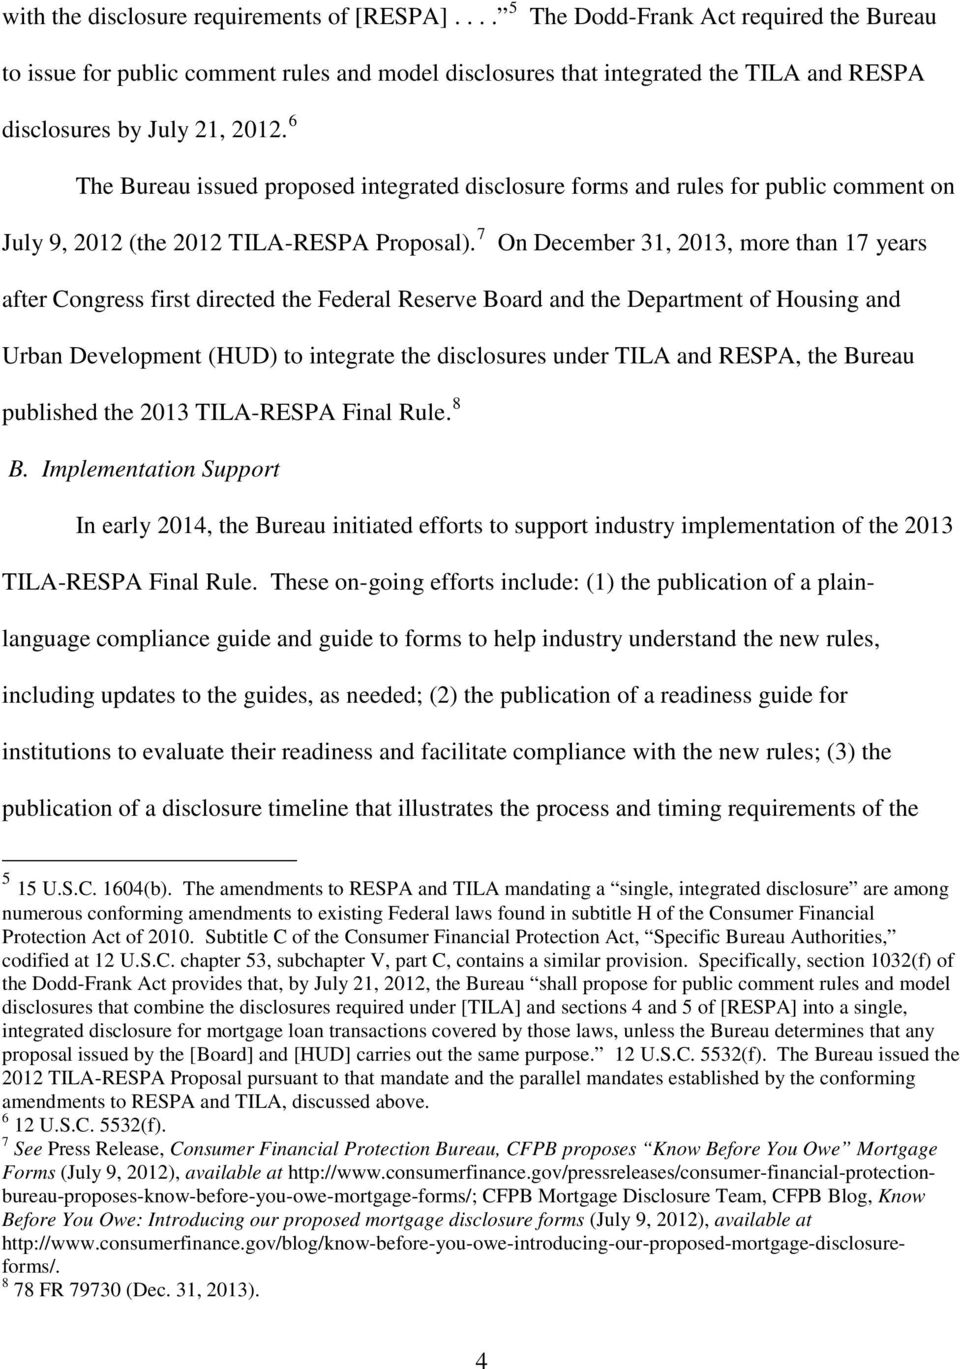 6 The Bureau issued proposed integrated disclosure forms and rules for public comment on July 9, 2012 (the 2012 TILA-RESPA Proposal).